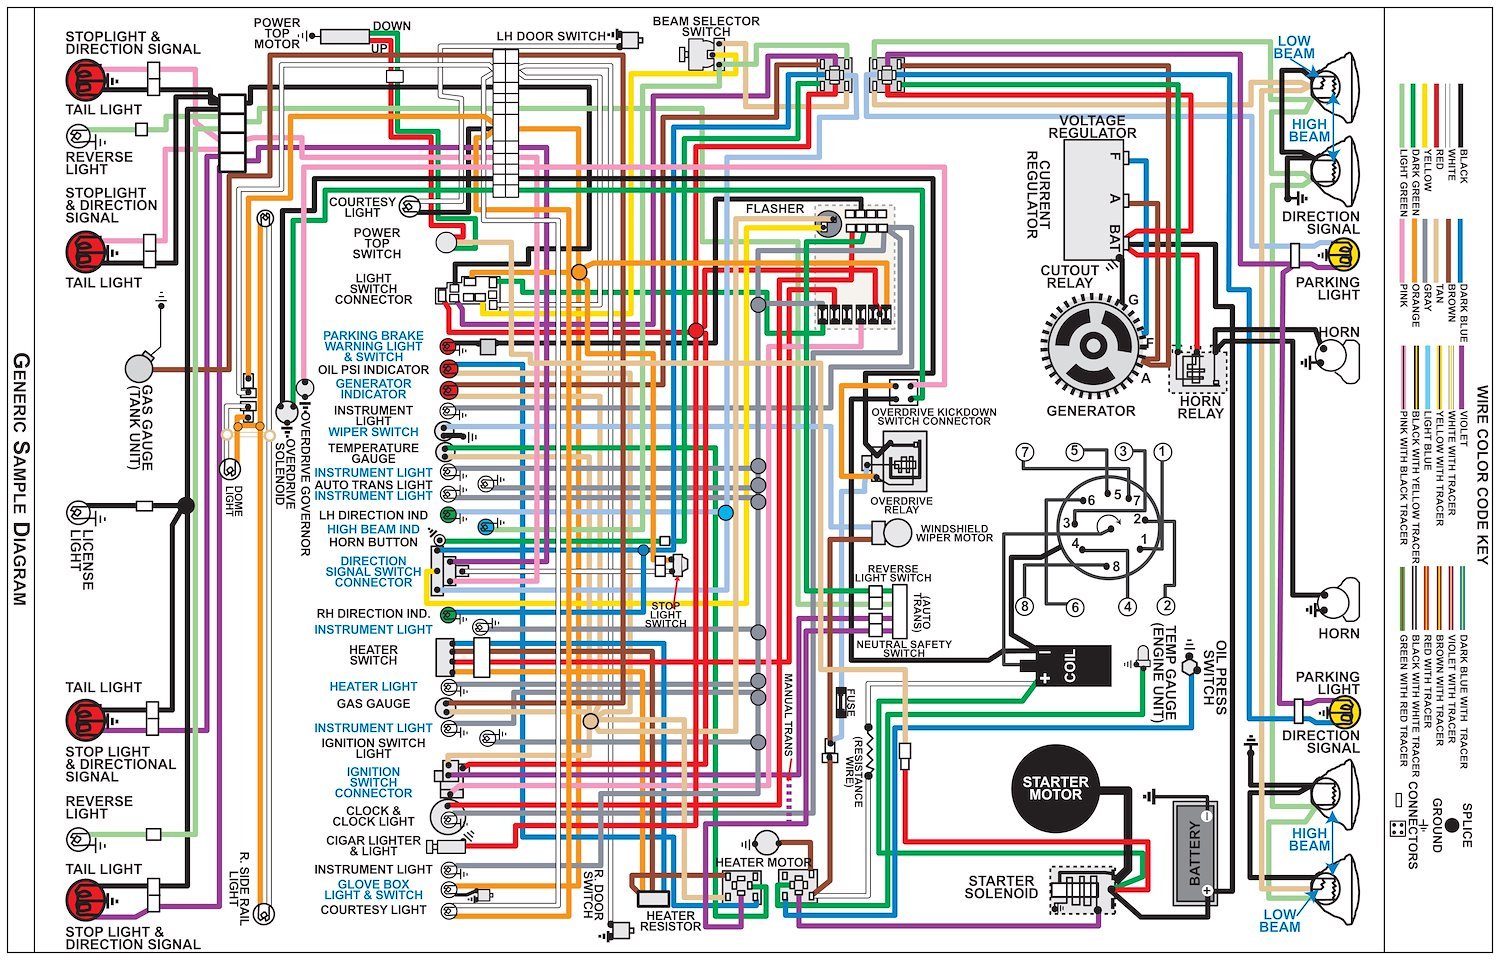 Wiring Diagram for 1963 Chevy Truck, 11 in.